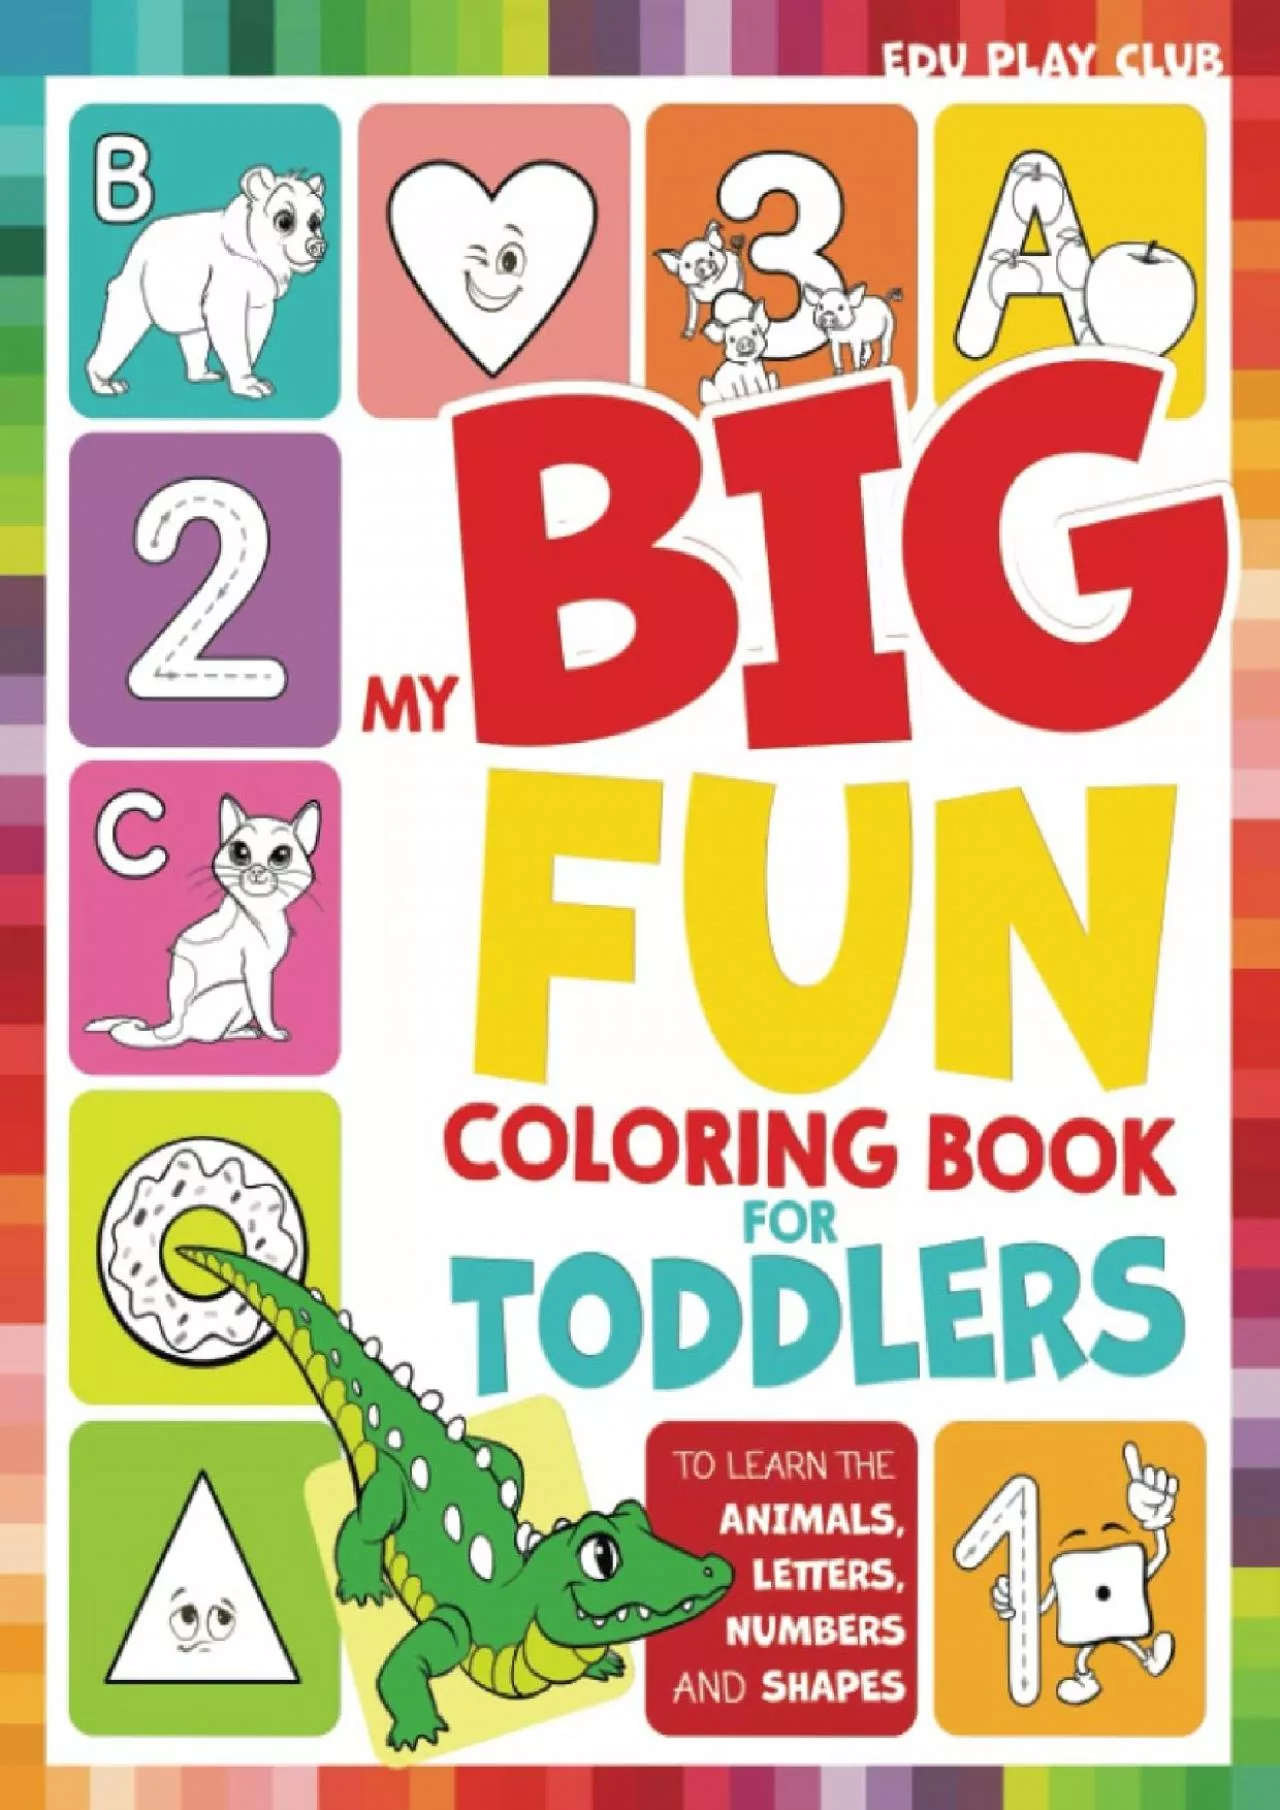 [READ] My Big Fun Coloring Book for Toddlers to Learn the Animals, Shapes, Colors, Numbers